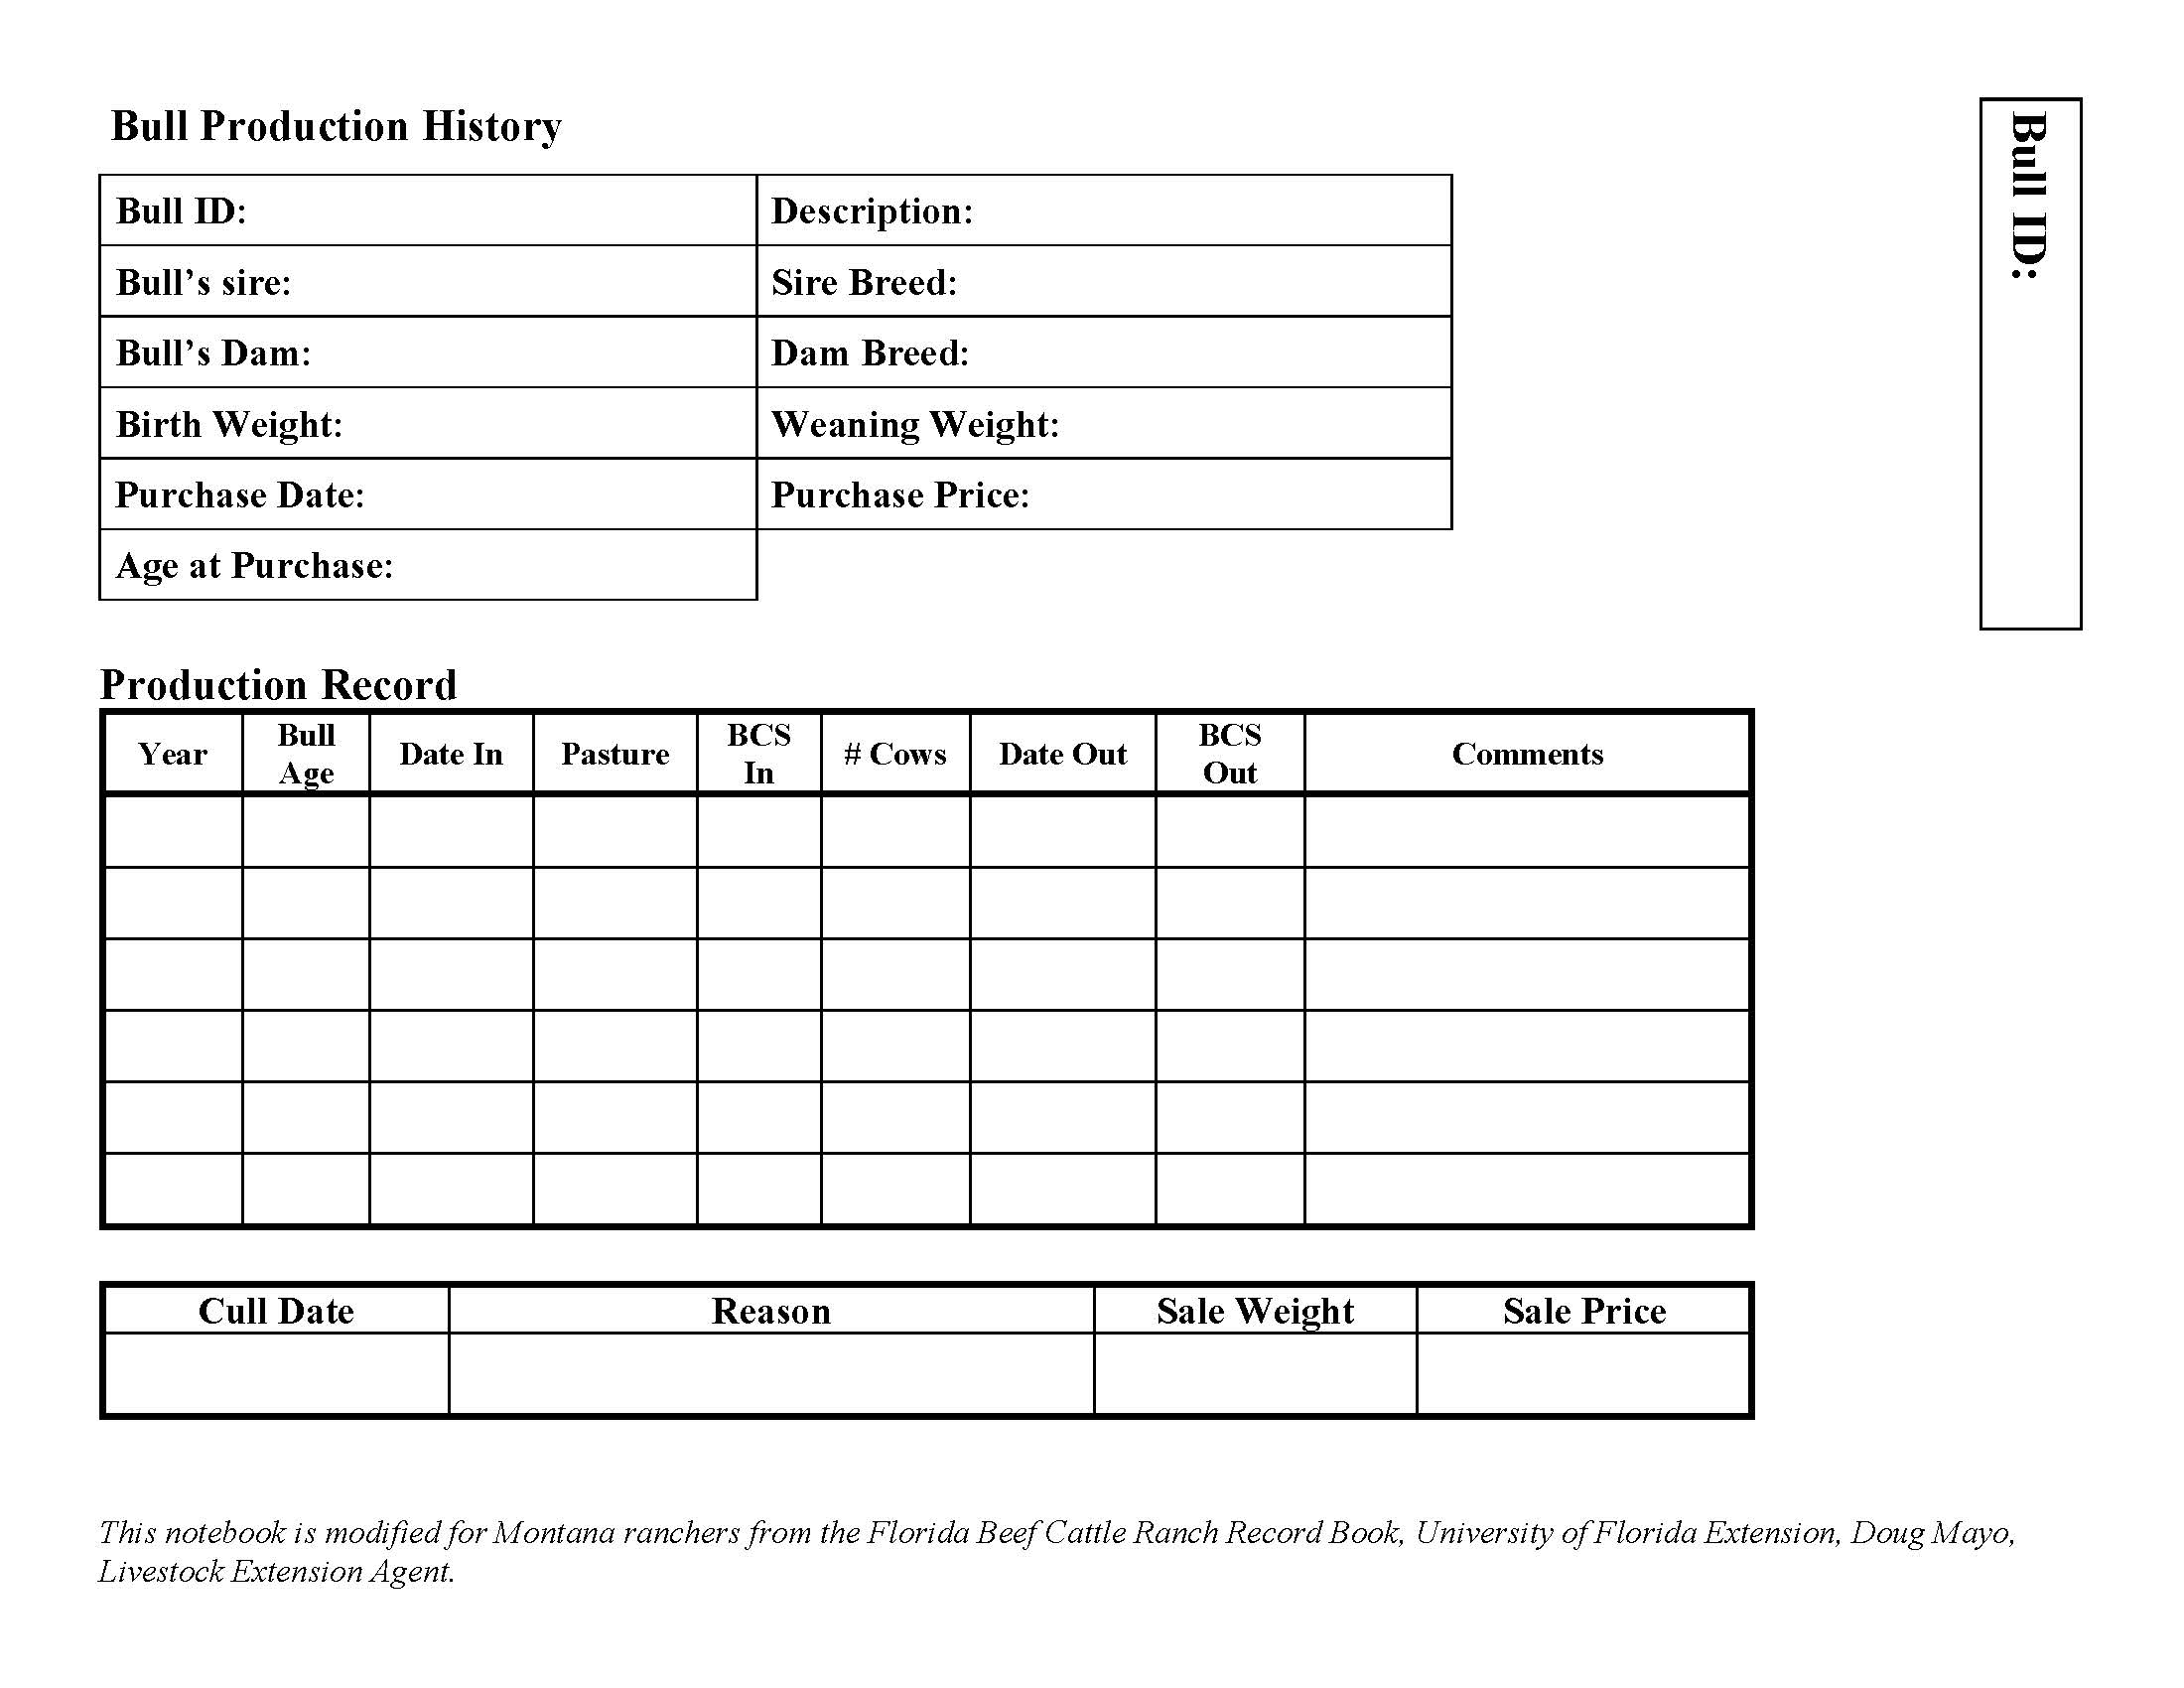 A sample table to keep records on bull production history. Used in the rancher notebook.